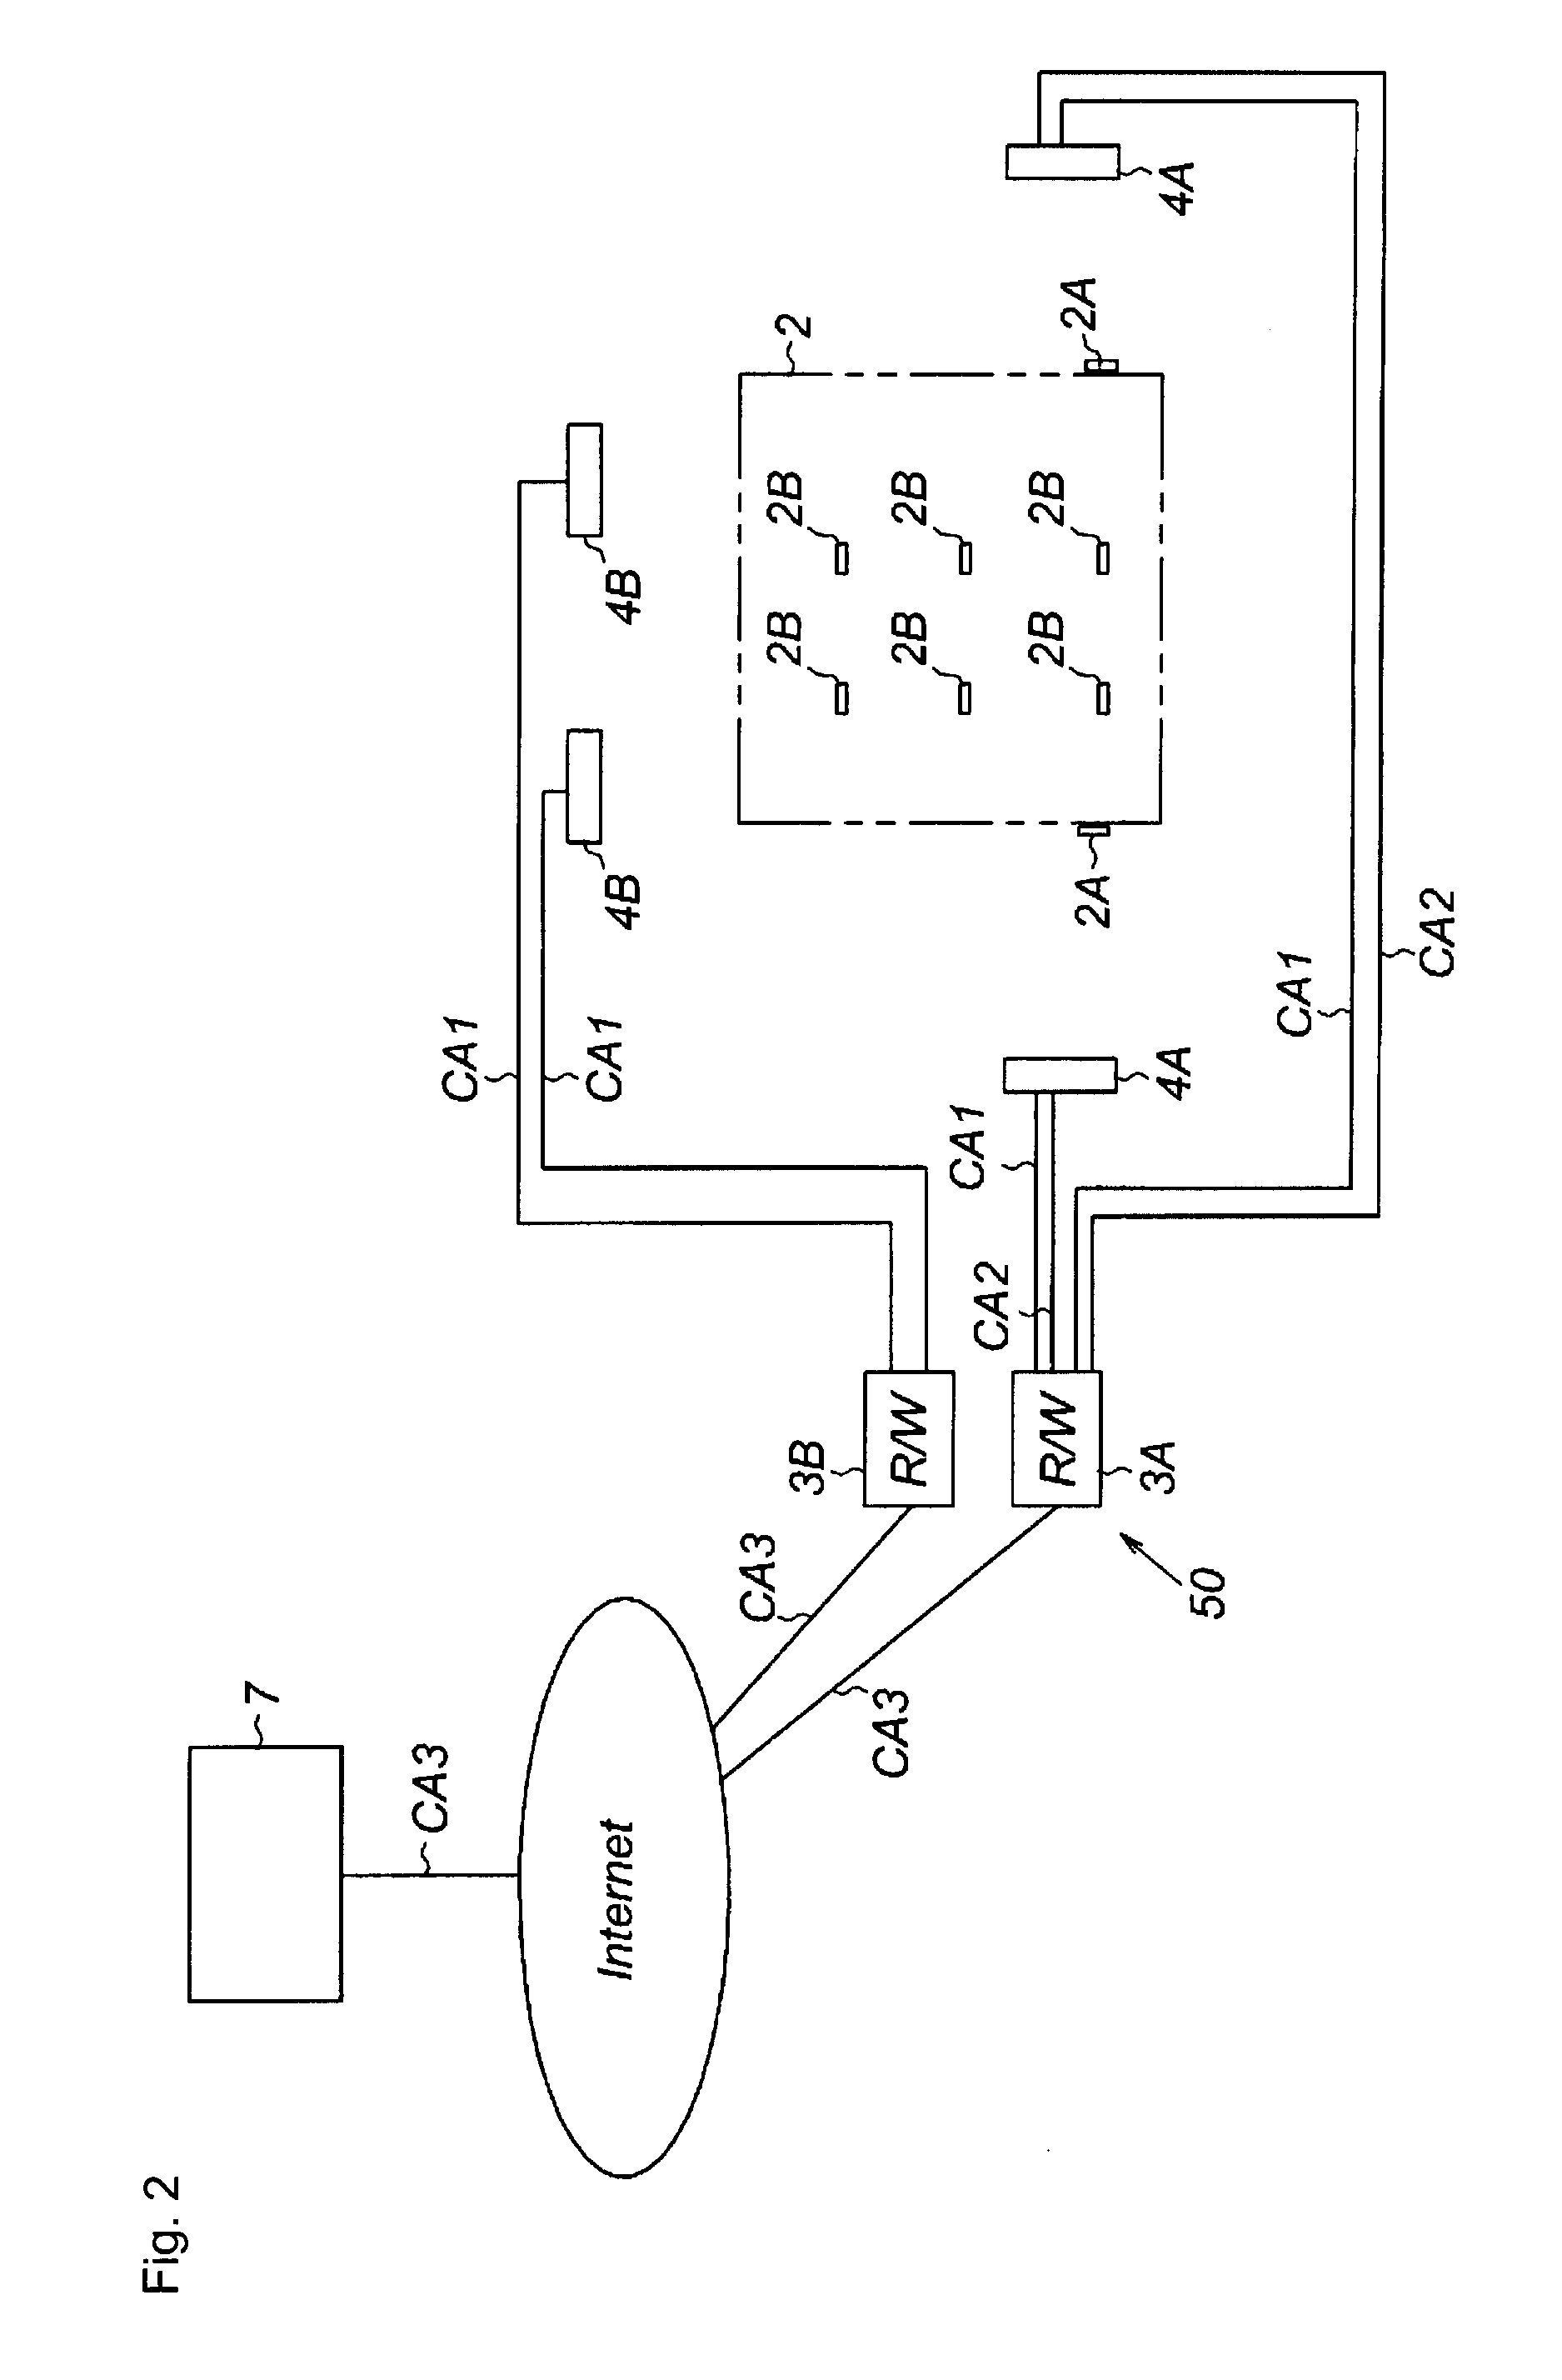 Tag associating system, tag associating method, and tag moving direction detection system